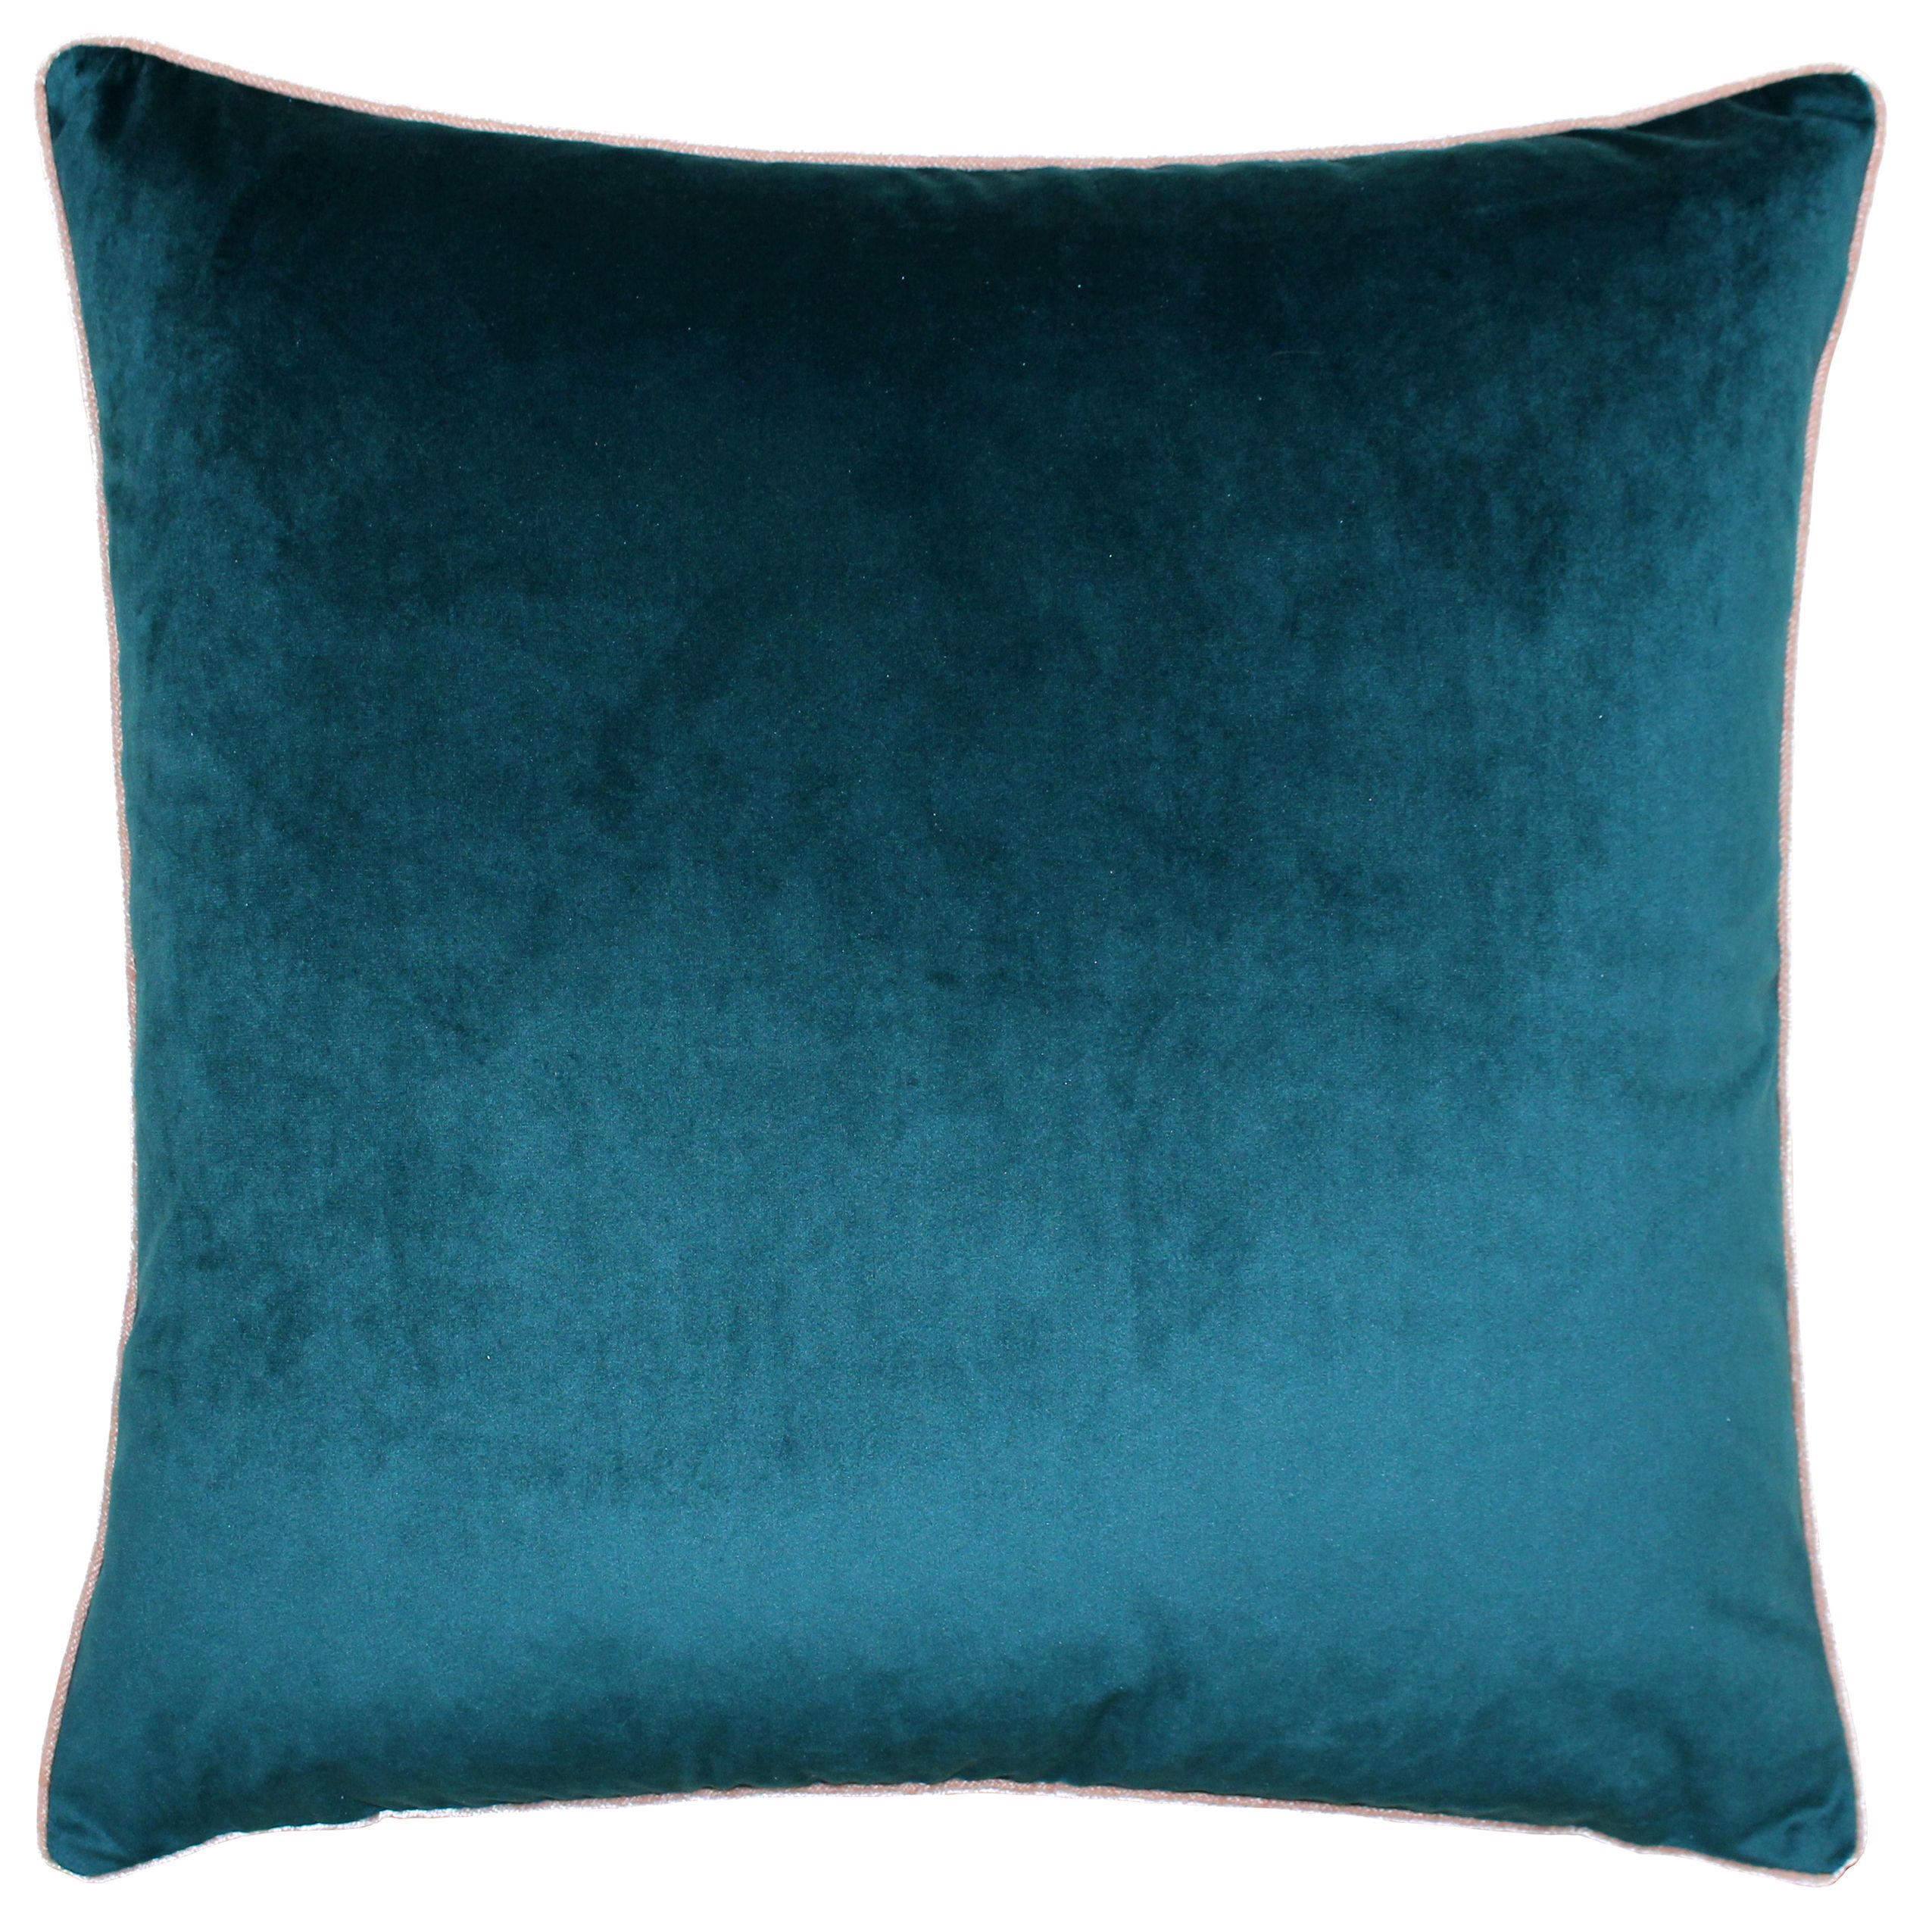 You need never worry about matching your cushions with the Meridian range. Made of unspeakably soft velvet feel fabric no words or pictures can do these covers justice. Each larger than average cushion has a plain front and reverse with contrasting piped edges in a range of rich complimentary colours which feature throughout the entire collection. With a small and discreet zip closure they are easy to fill and secure. These sumptuous Polyester Filled Cushions are made of 100% hard-wearing polyester and are incredibly easy to care for as they are all machine wash and iron appropriate.